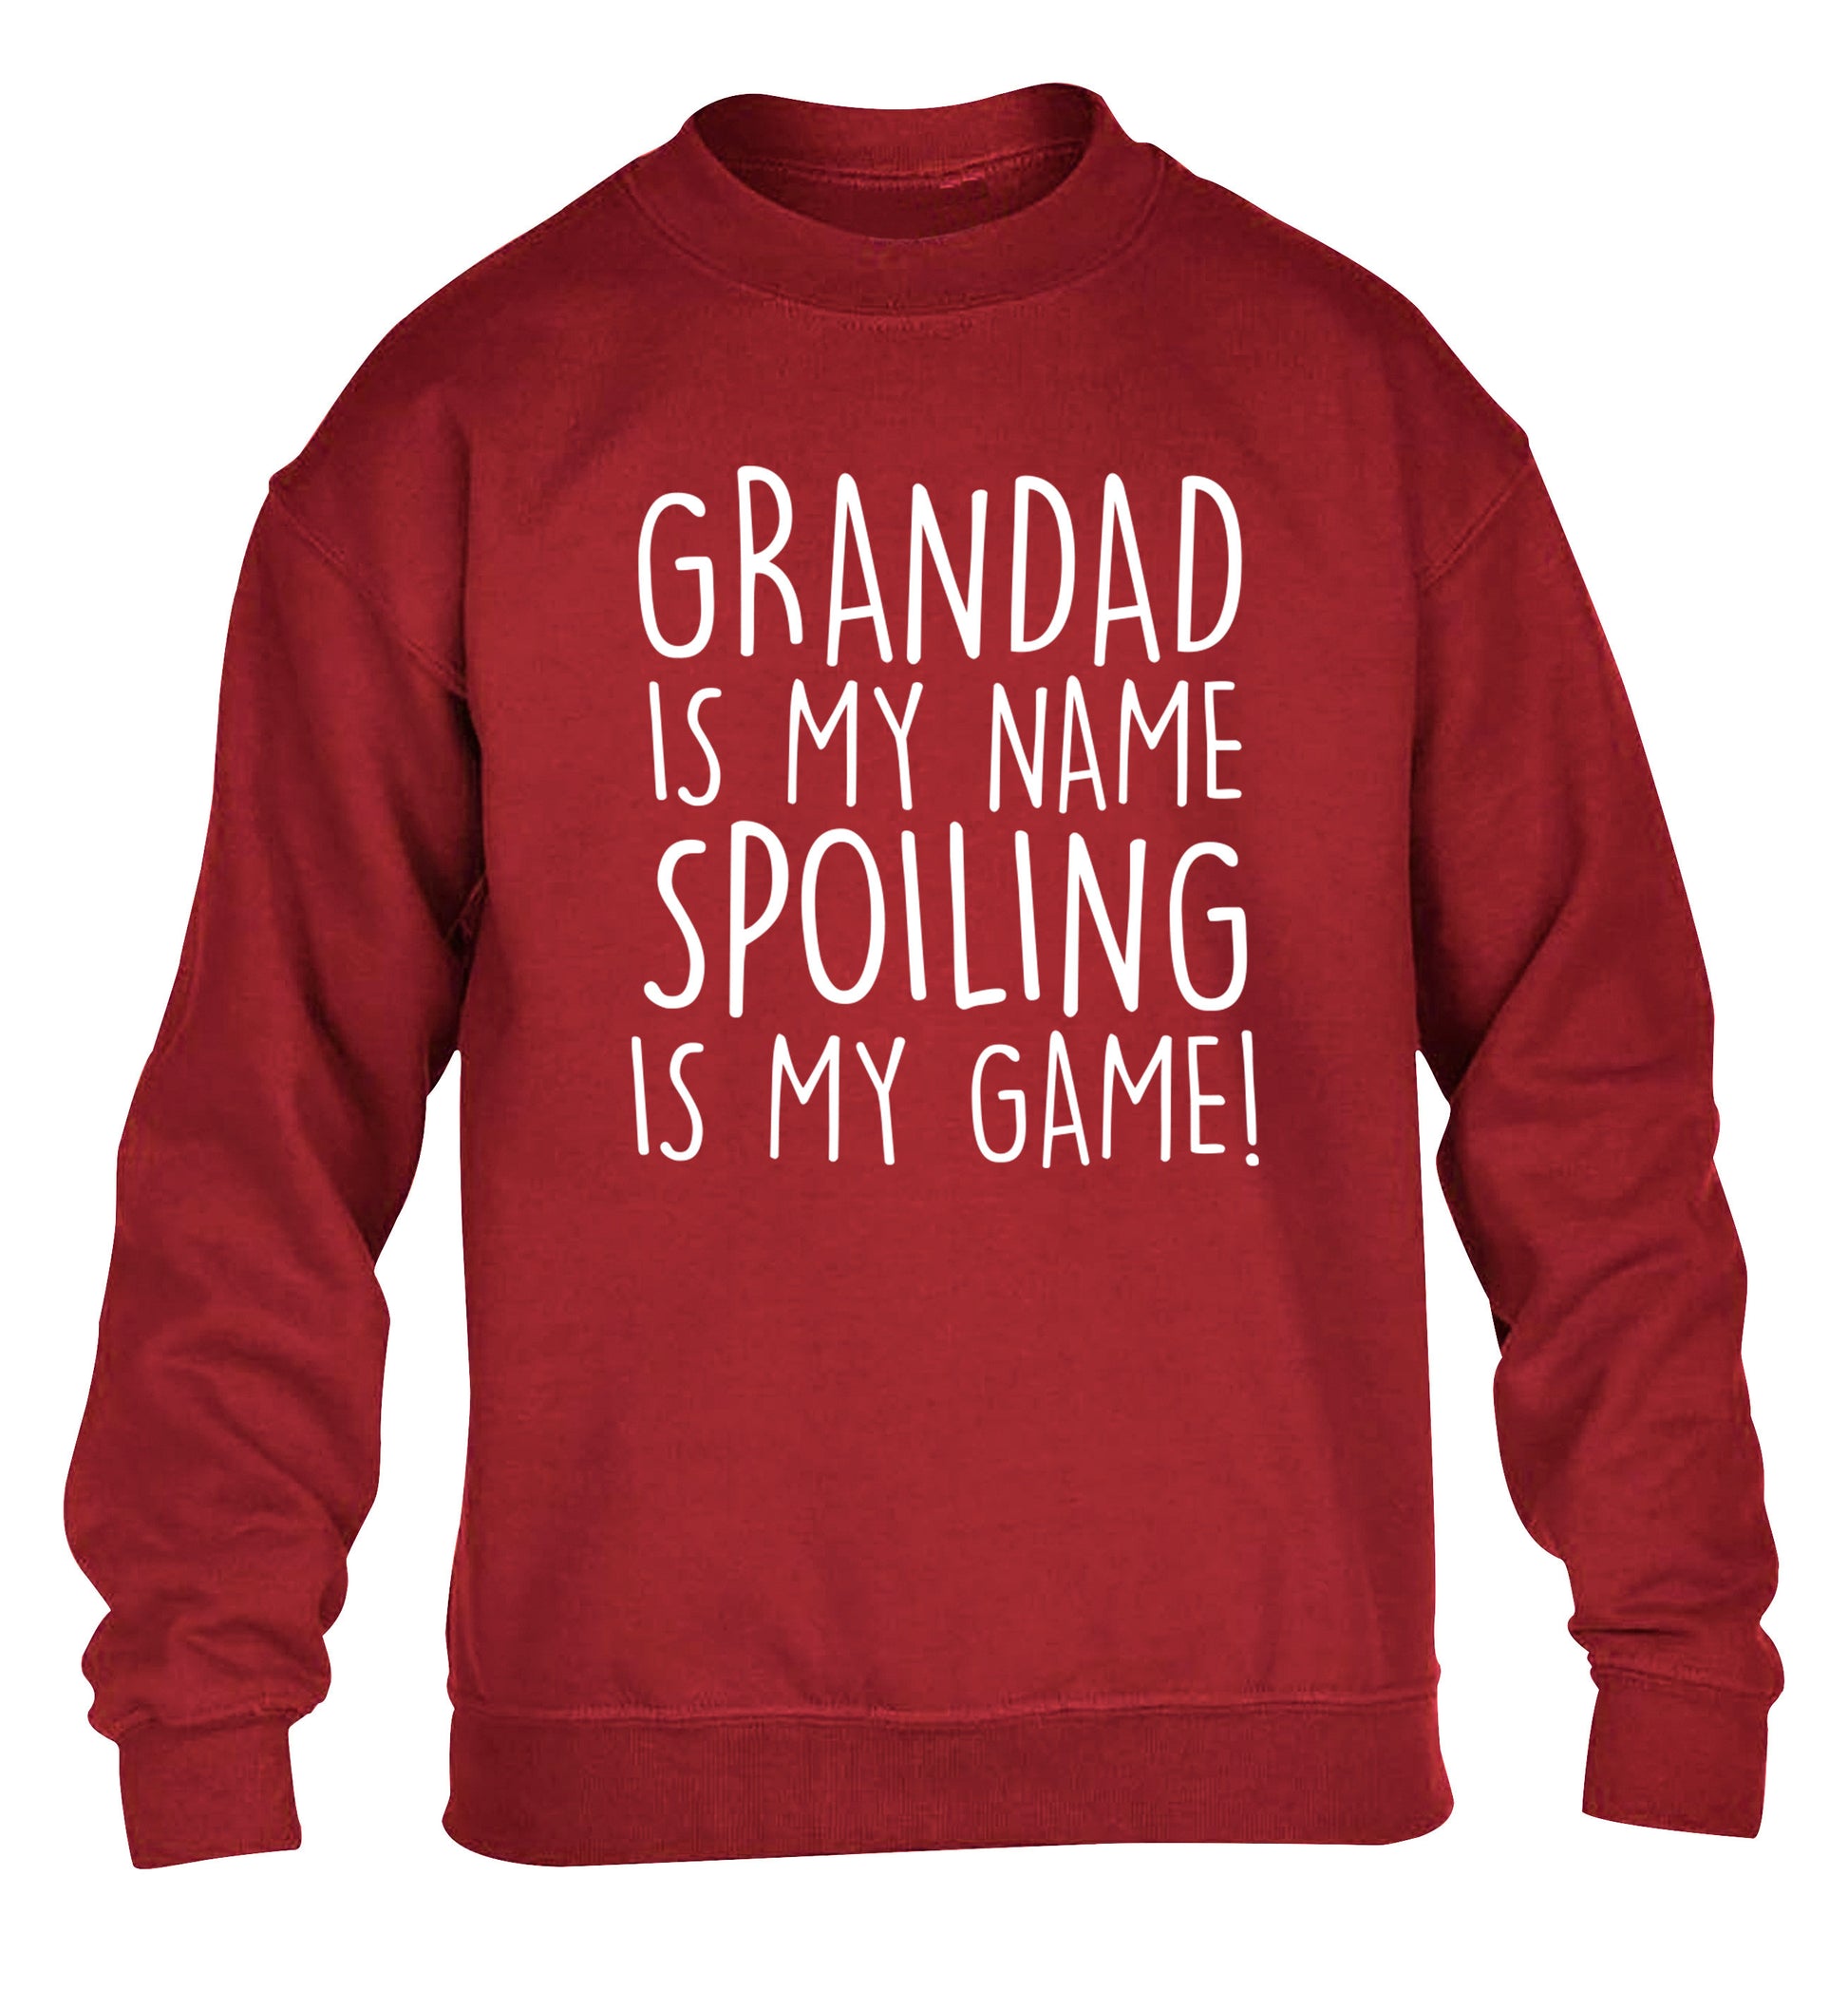 Grandad is my name, spoiling is my game children's grey sweater 12-14 Years